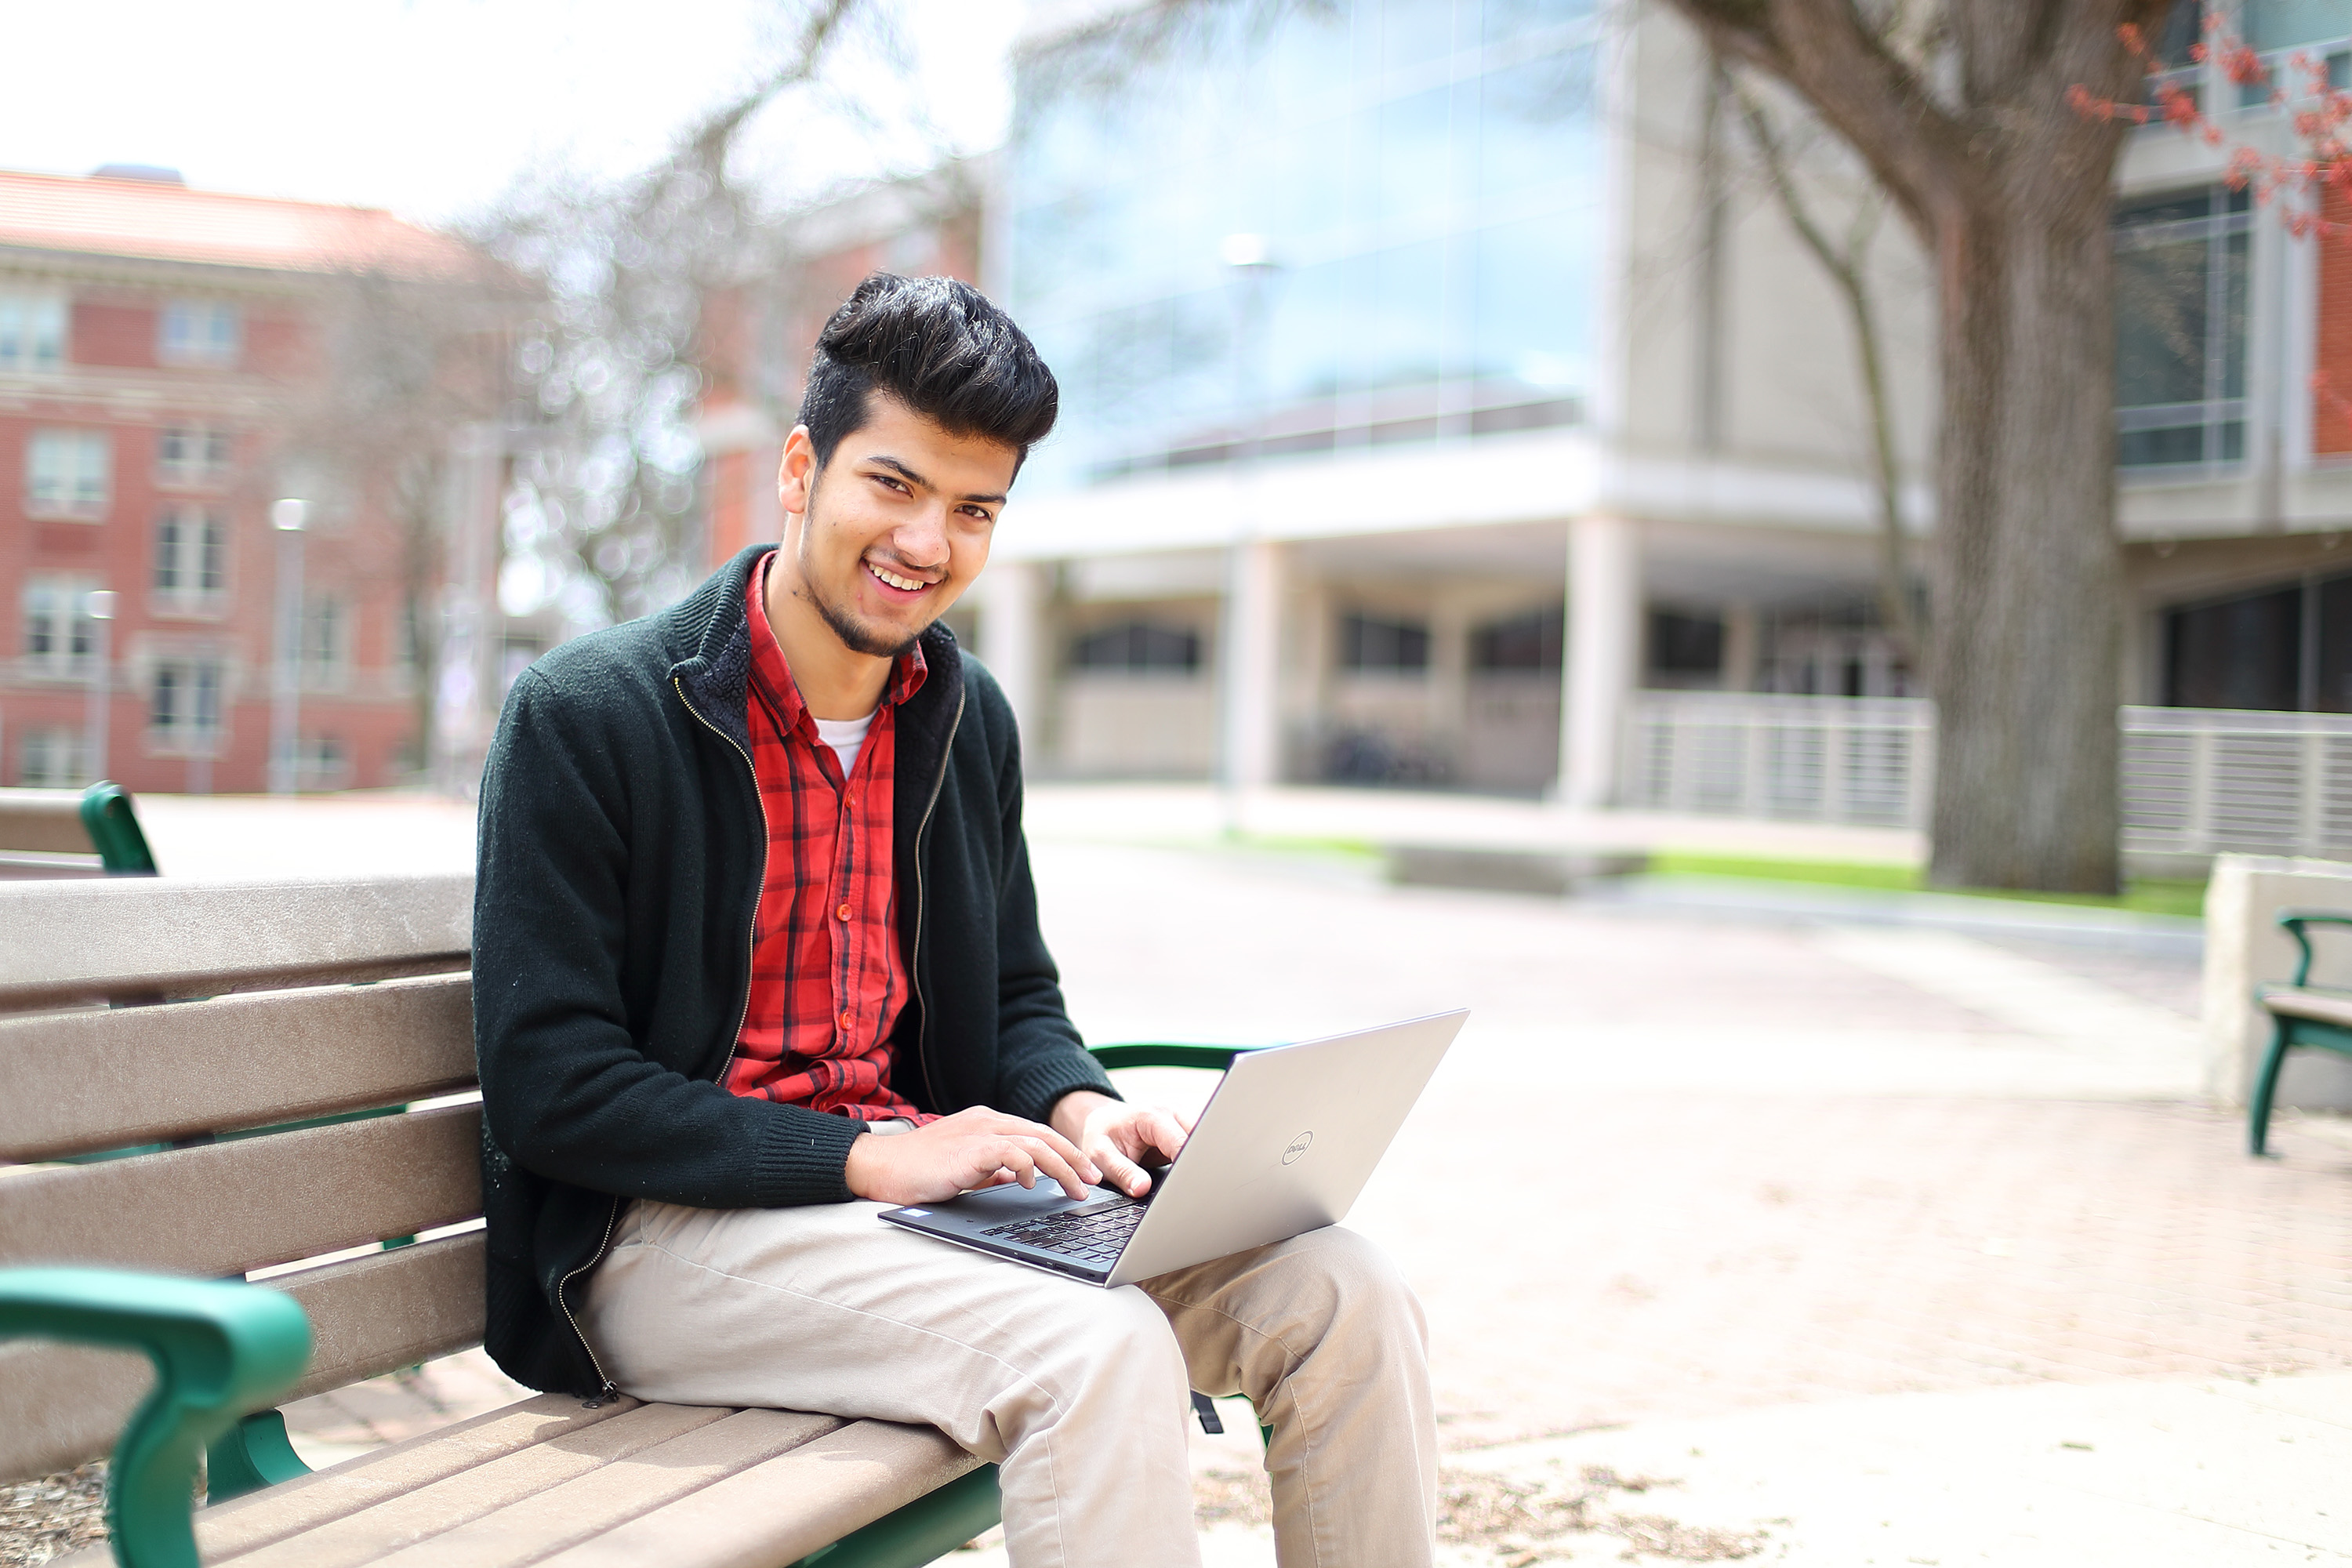 Smiling student sitting on bench outside